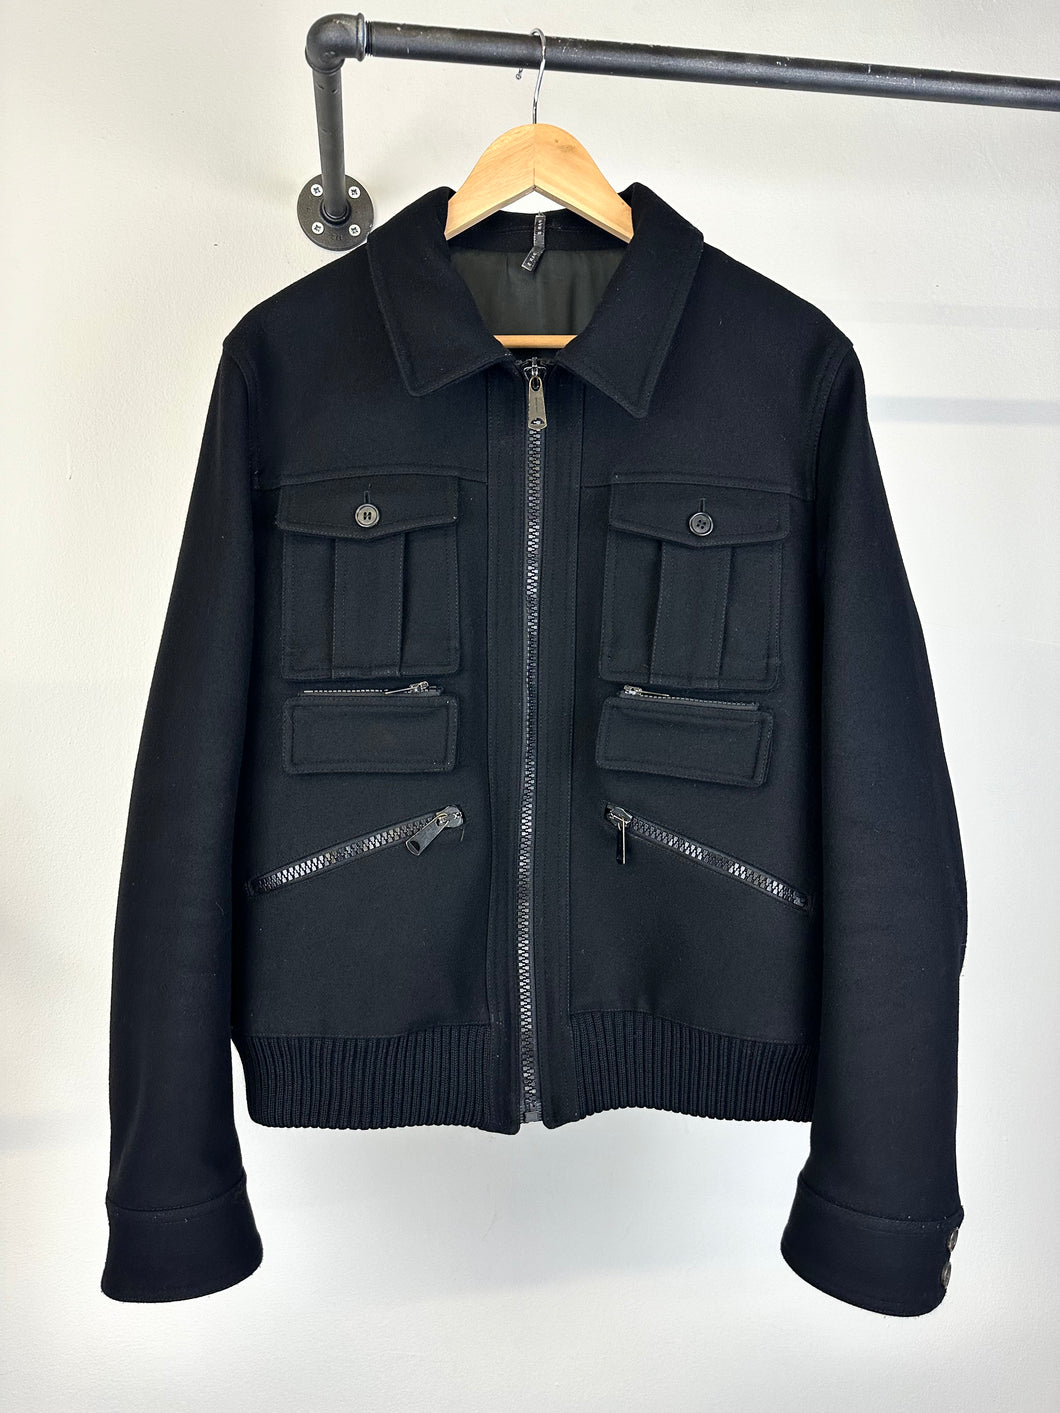 AW06 Dior by Hedi Slimane military bomber jacket